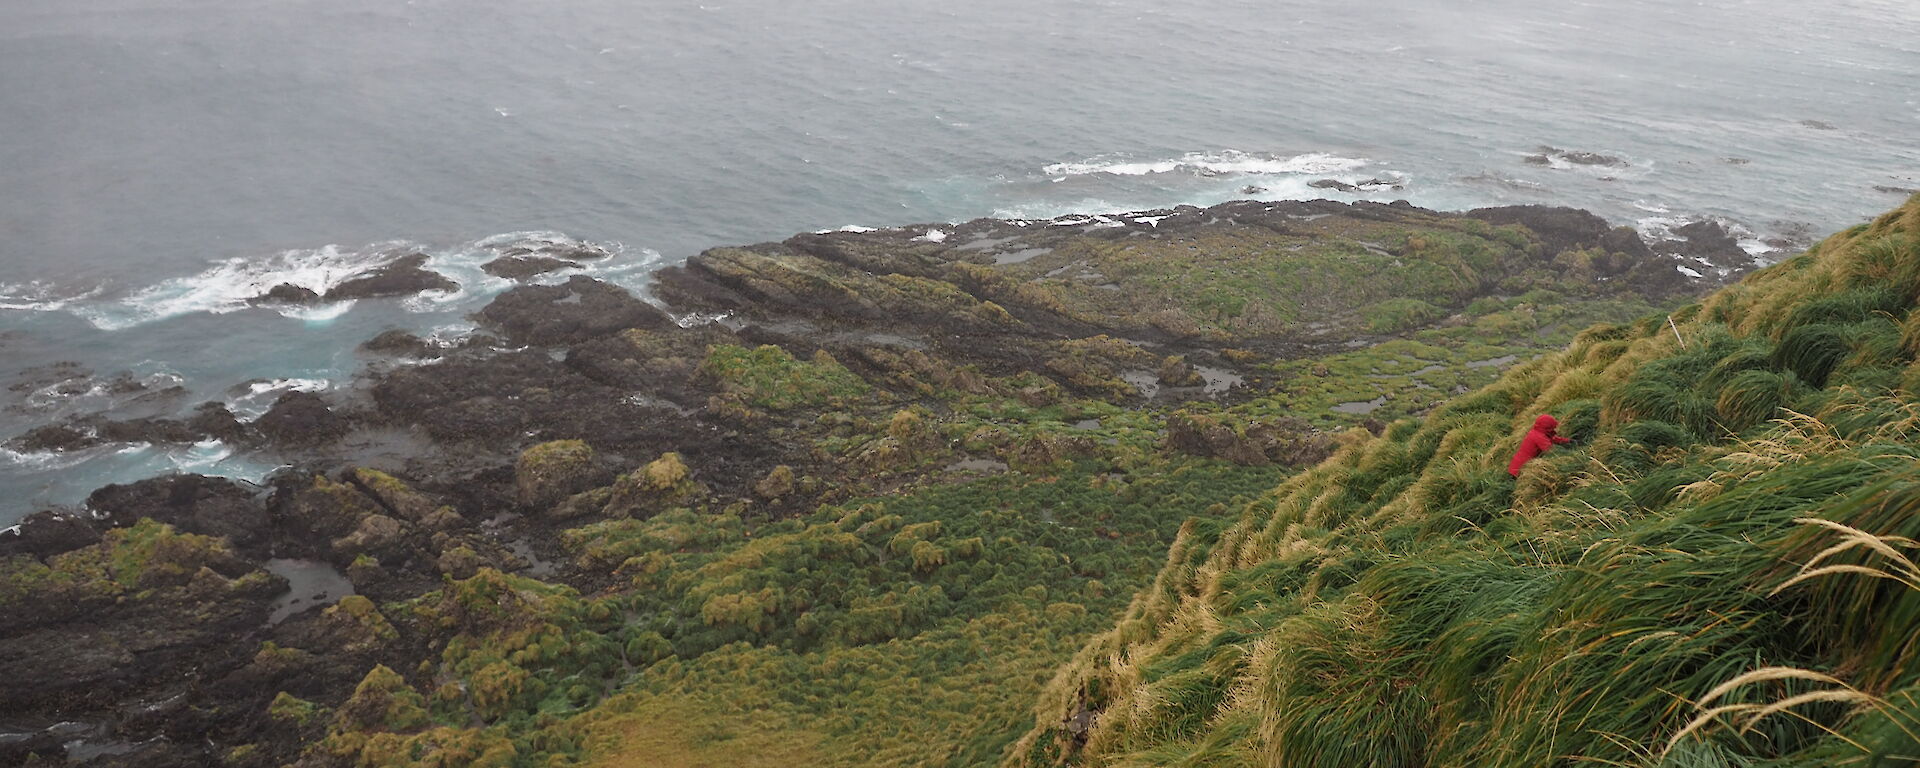 A ranger is dwarfed by a tussock covered hill overlooking the ocean on Macquarie Island